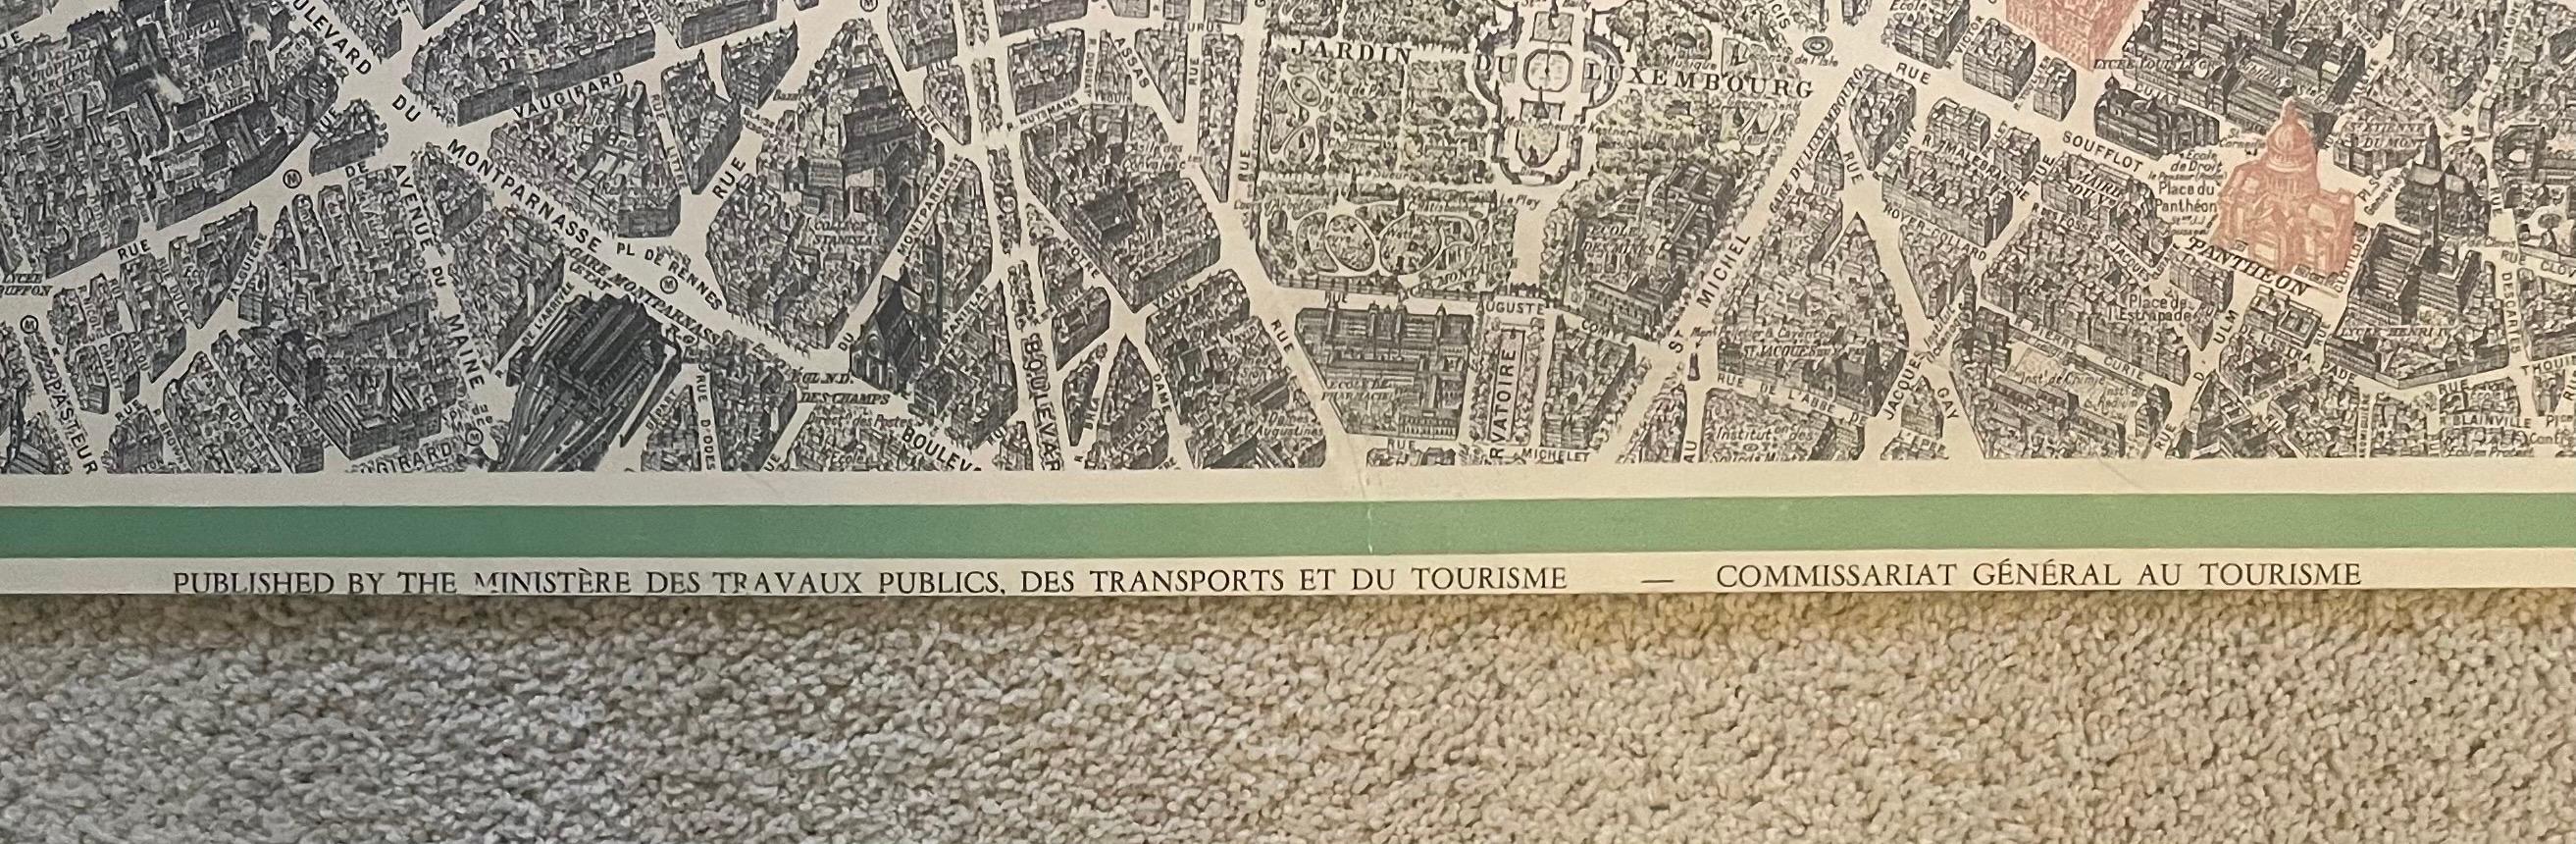 Lithographiekarte „View of the Center of Paris Taken from the Air“ im Angebot 11